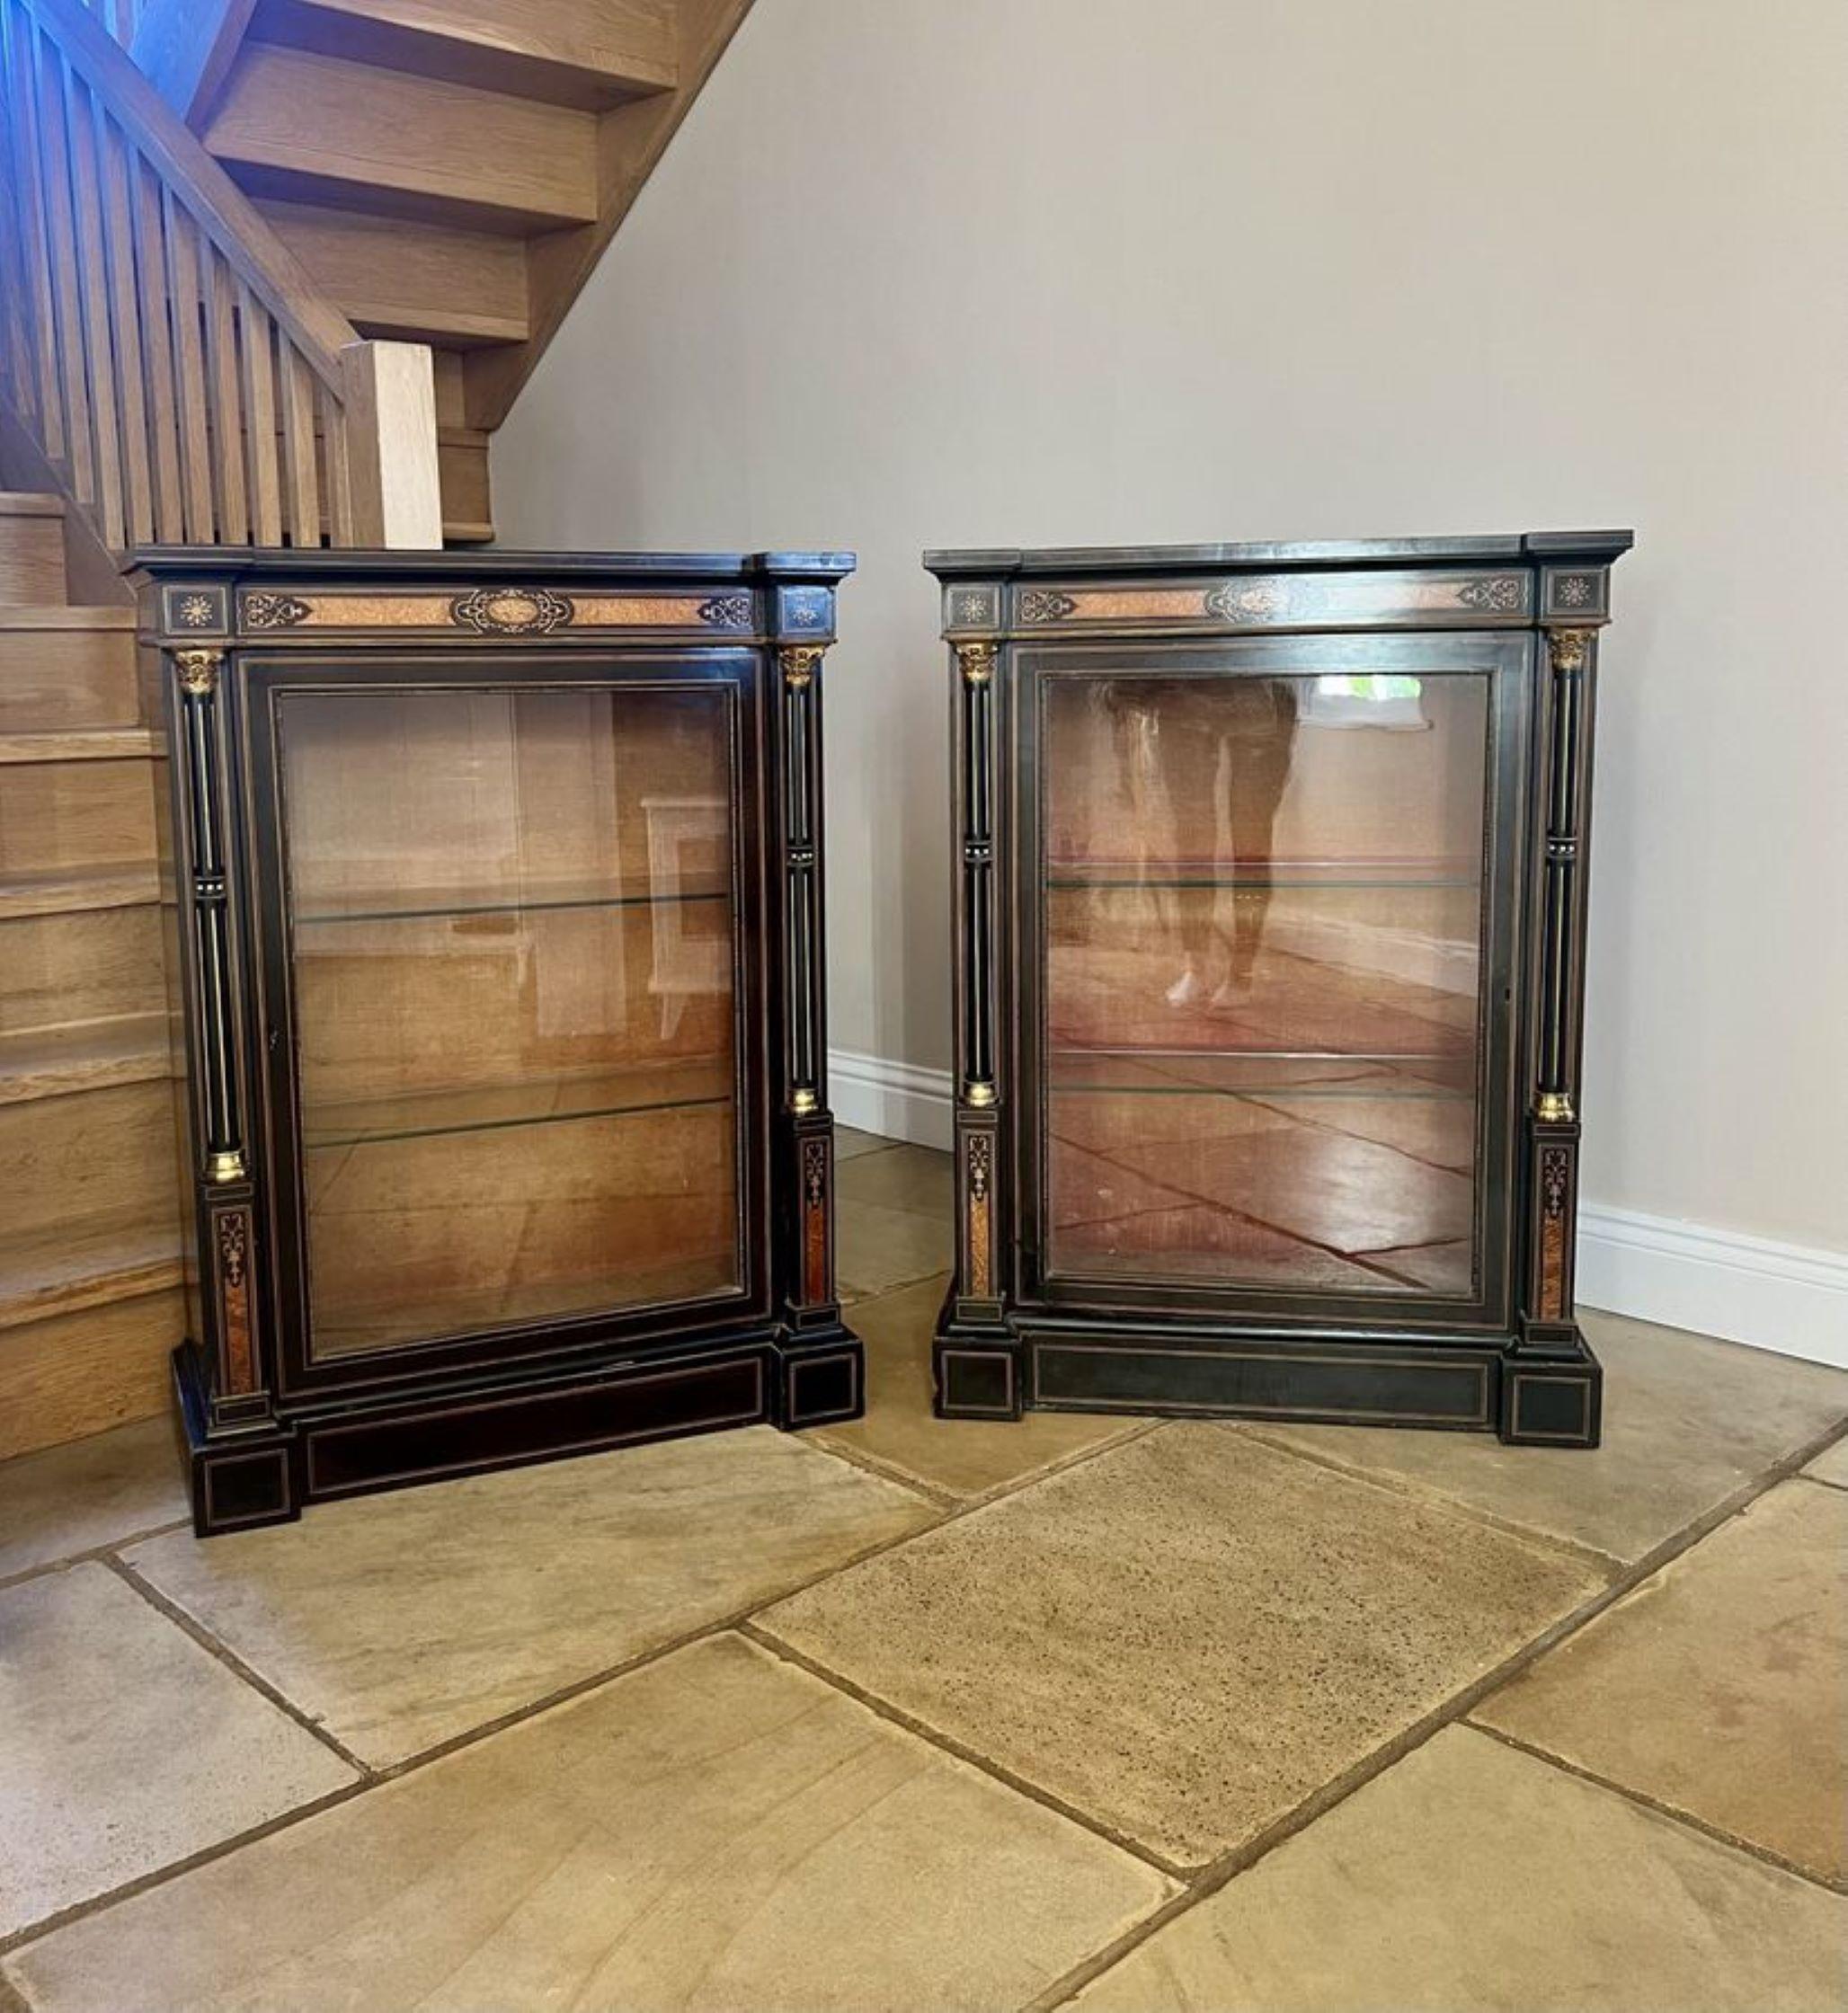 Pair of antique Victorian quality ebonised and amboyna inlaid side cabinets, having ebonised tops above an amboyna inlaid frieze single glazed door opening to reveal two glass display shelves, having reeded columns to the sides, standing on plinth